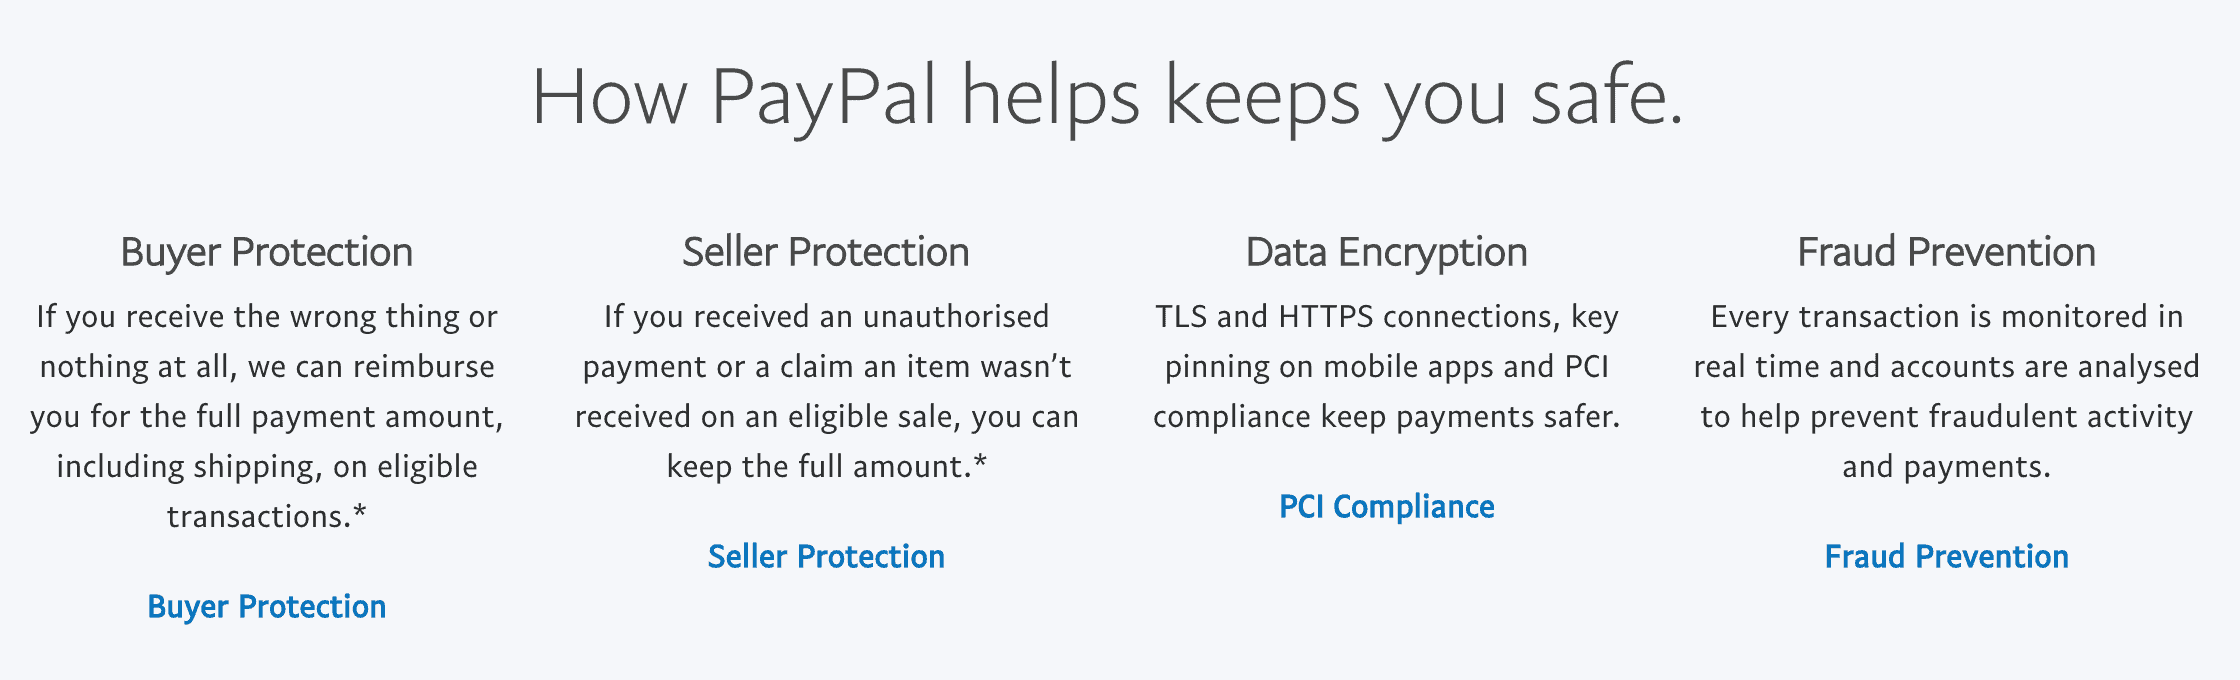 paypal security benefits bitcoin